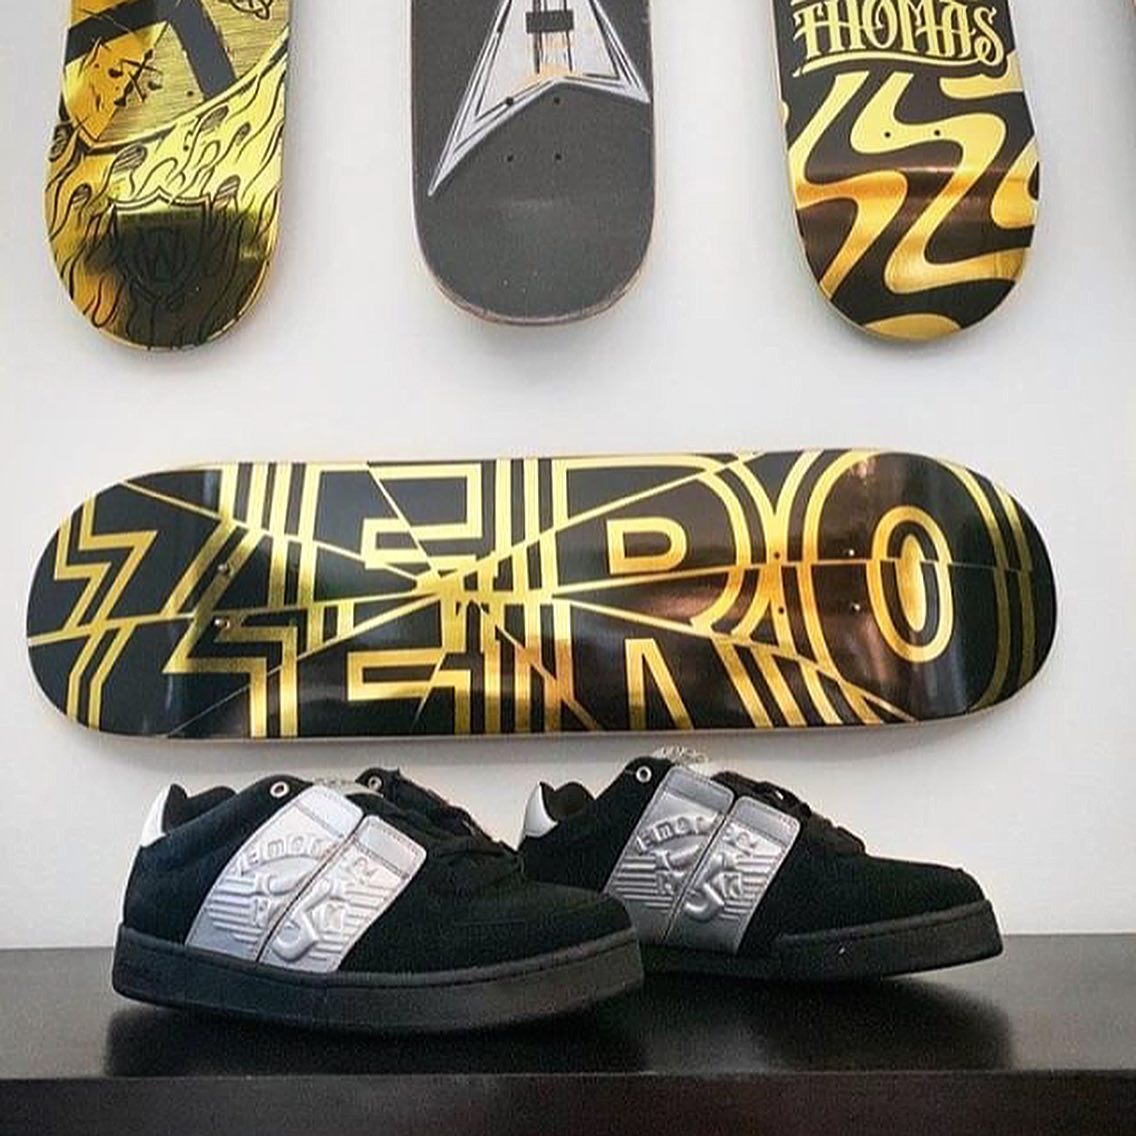 @gfk_bar sent us some amazing pics of his #zeroskateboards room with some gnarly #emerica #heathkirchart 3s.  Apparently he has a Toy Machine room as well🤯. #sk8shoewars